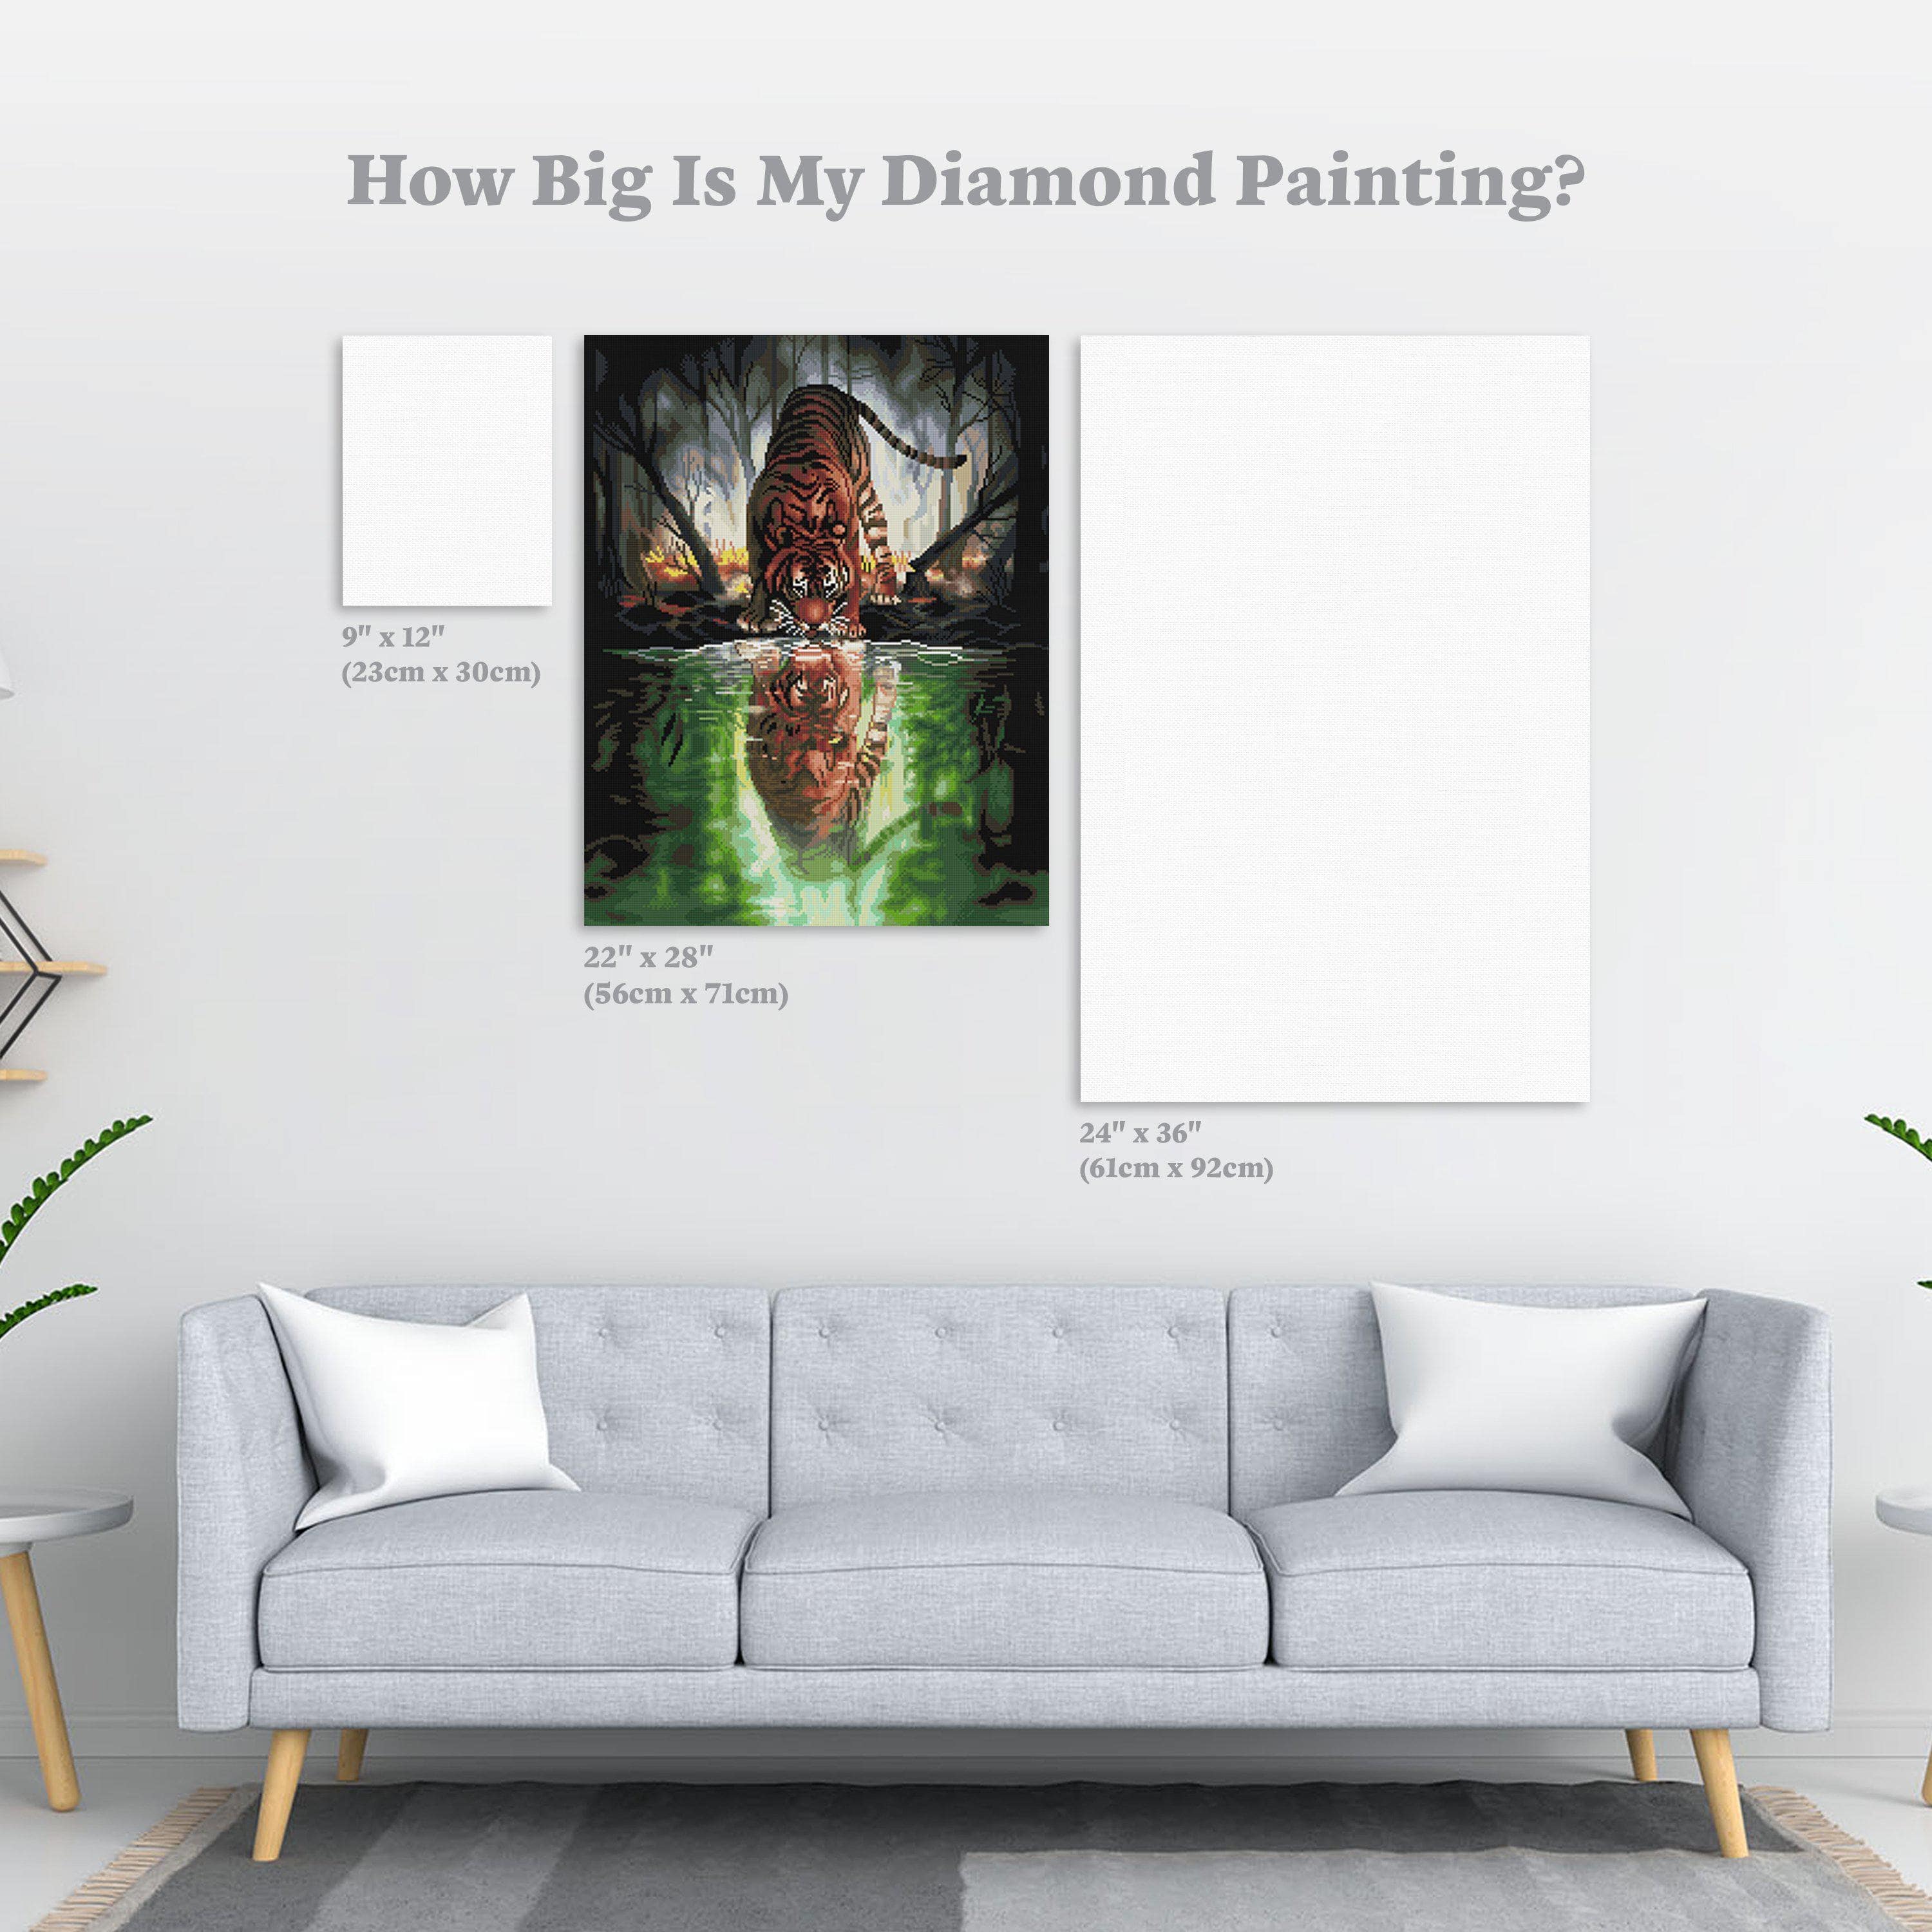 I Got A New Diamond Painting Display Book. Guess How Big It Is